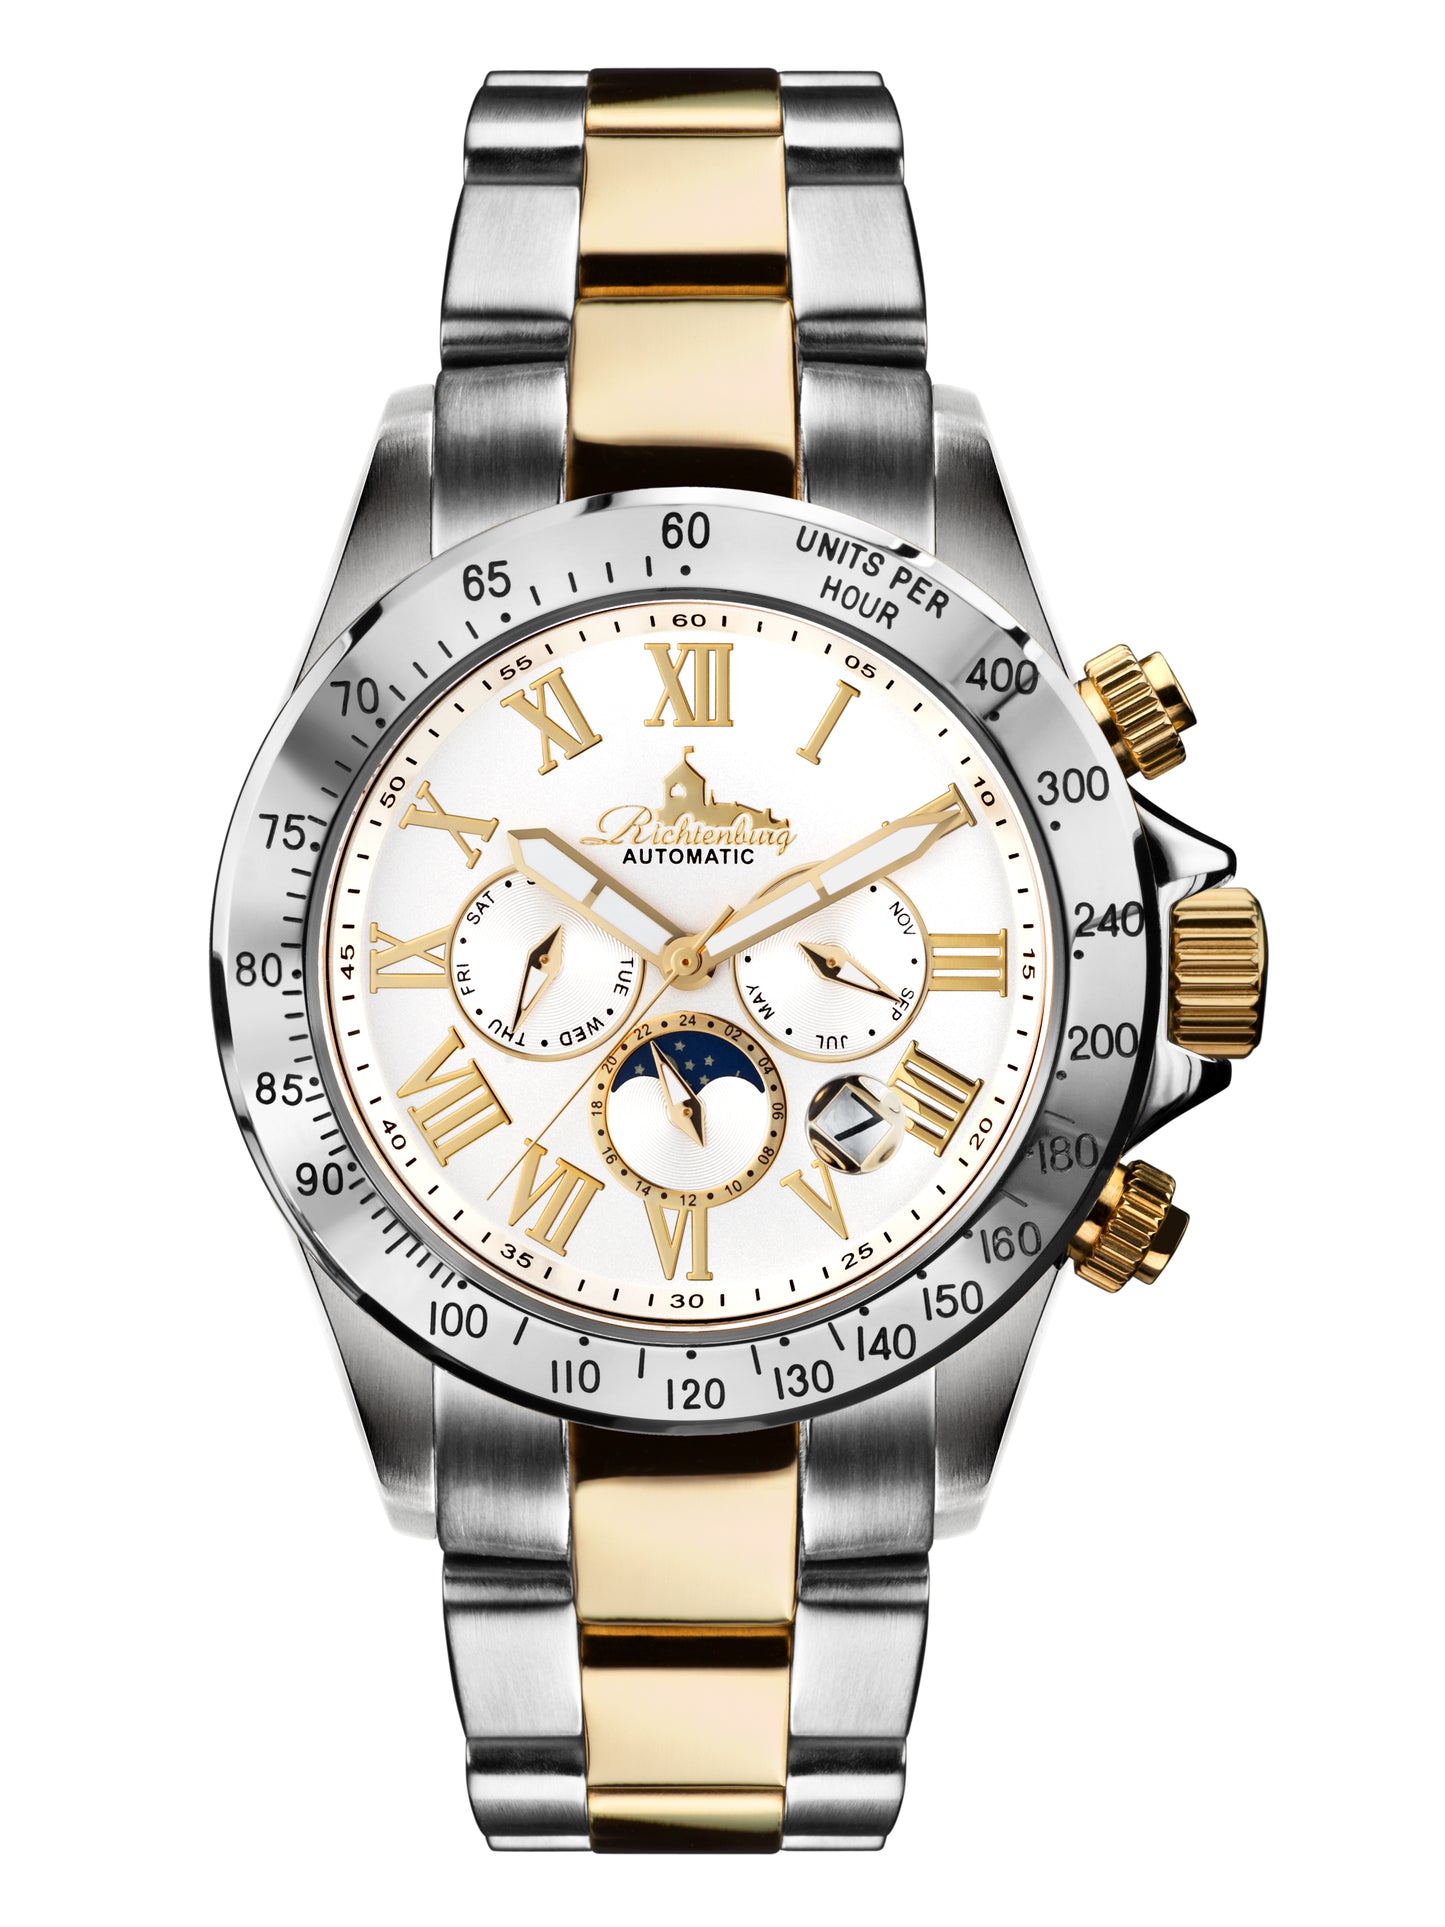 Automatic watches — Fastpace — Richtenburg — steel silver gold two-tone